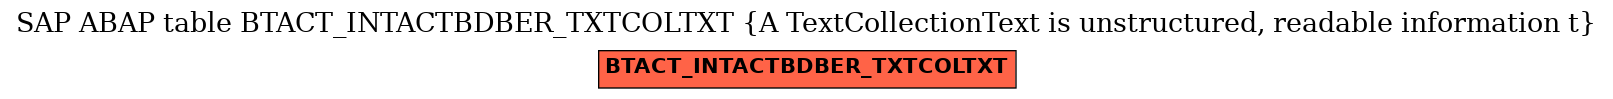 E-R Diagram for table BTACT_INTACTBDBER_TXTCOLTXT (A TextCollectionText is unstructured, readable information t)